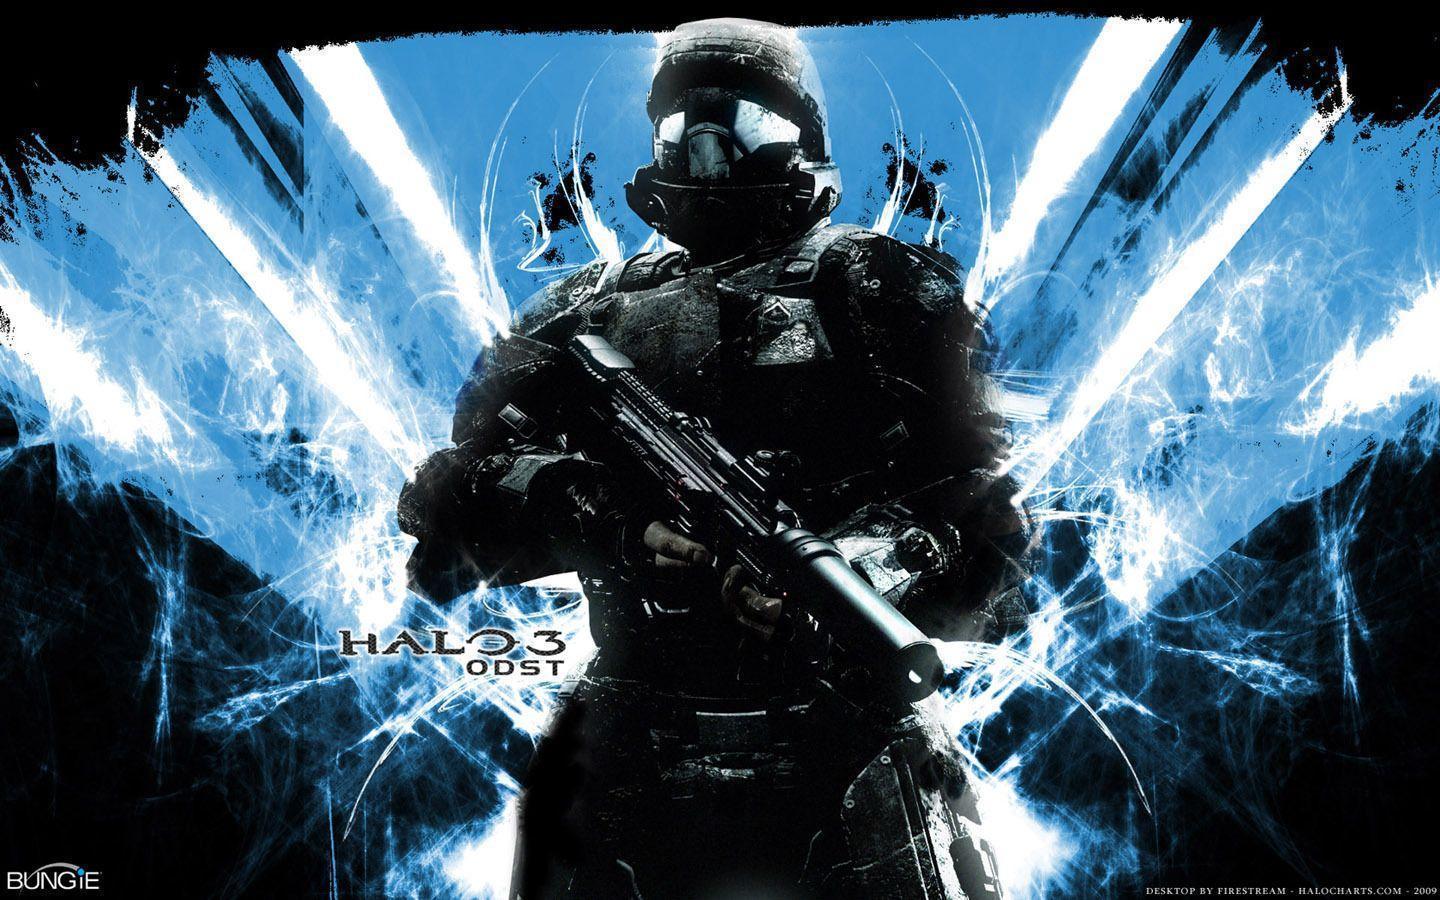 Halo 3 ODST image odst HD wallpaper and background photo